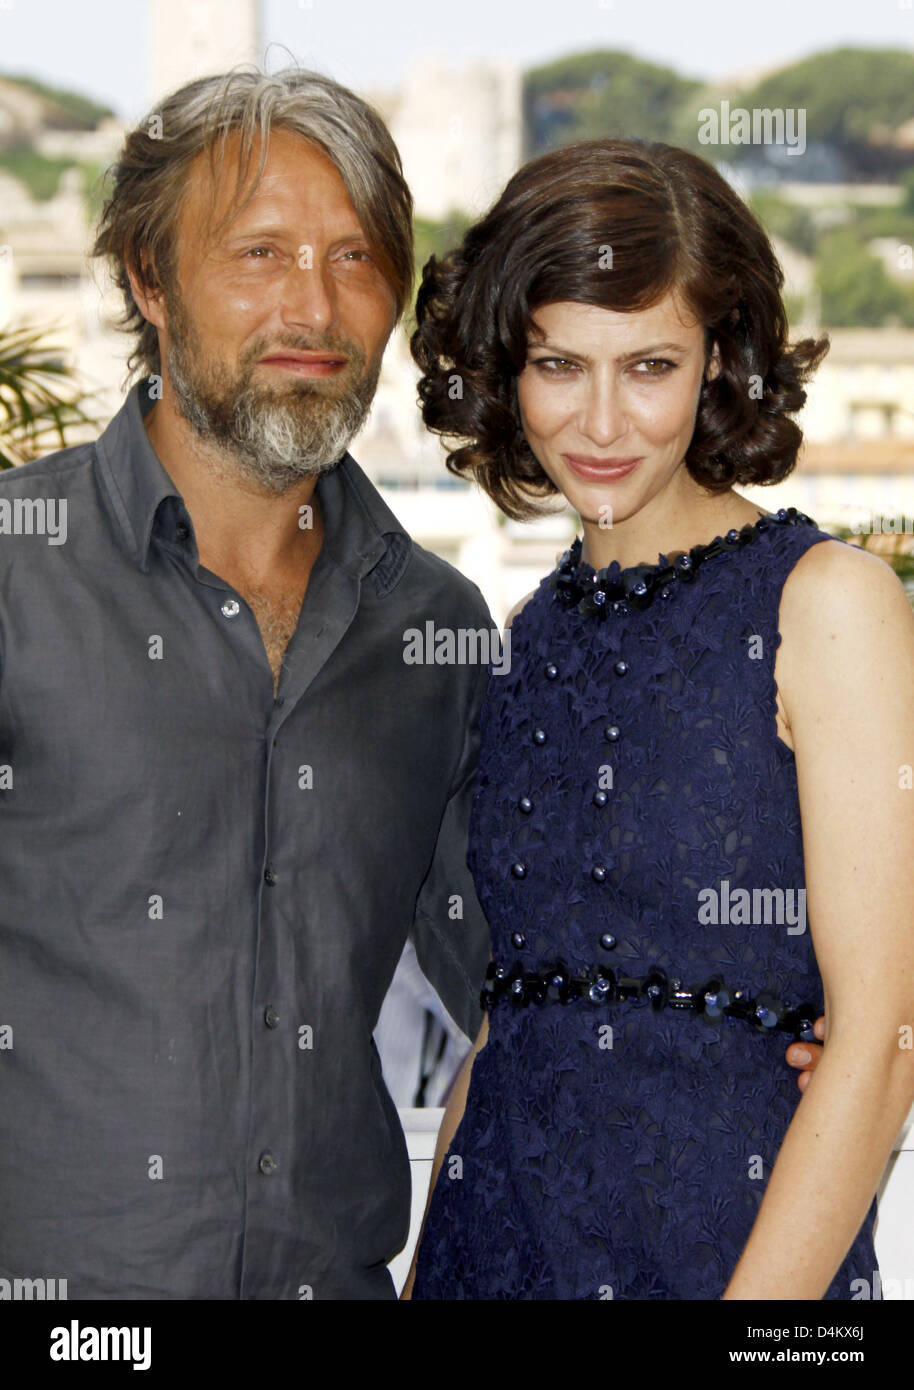 Danish actor Mads Mikkelsen and French actress Anna Mouglalis attend a  photo call for the film ?Coco Chanel & Igor Stravinsky? which runs out of  competition at the 62nd Cannes Film Festival